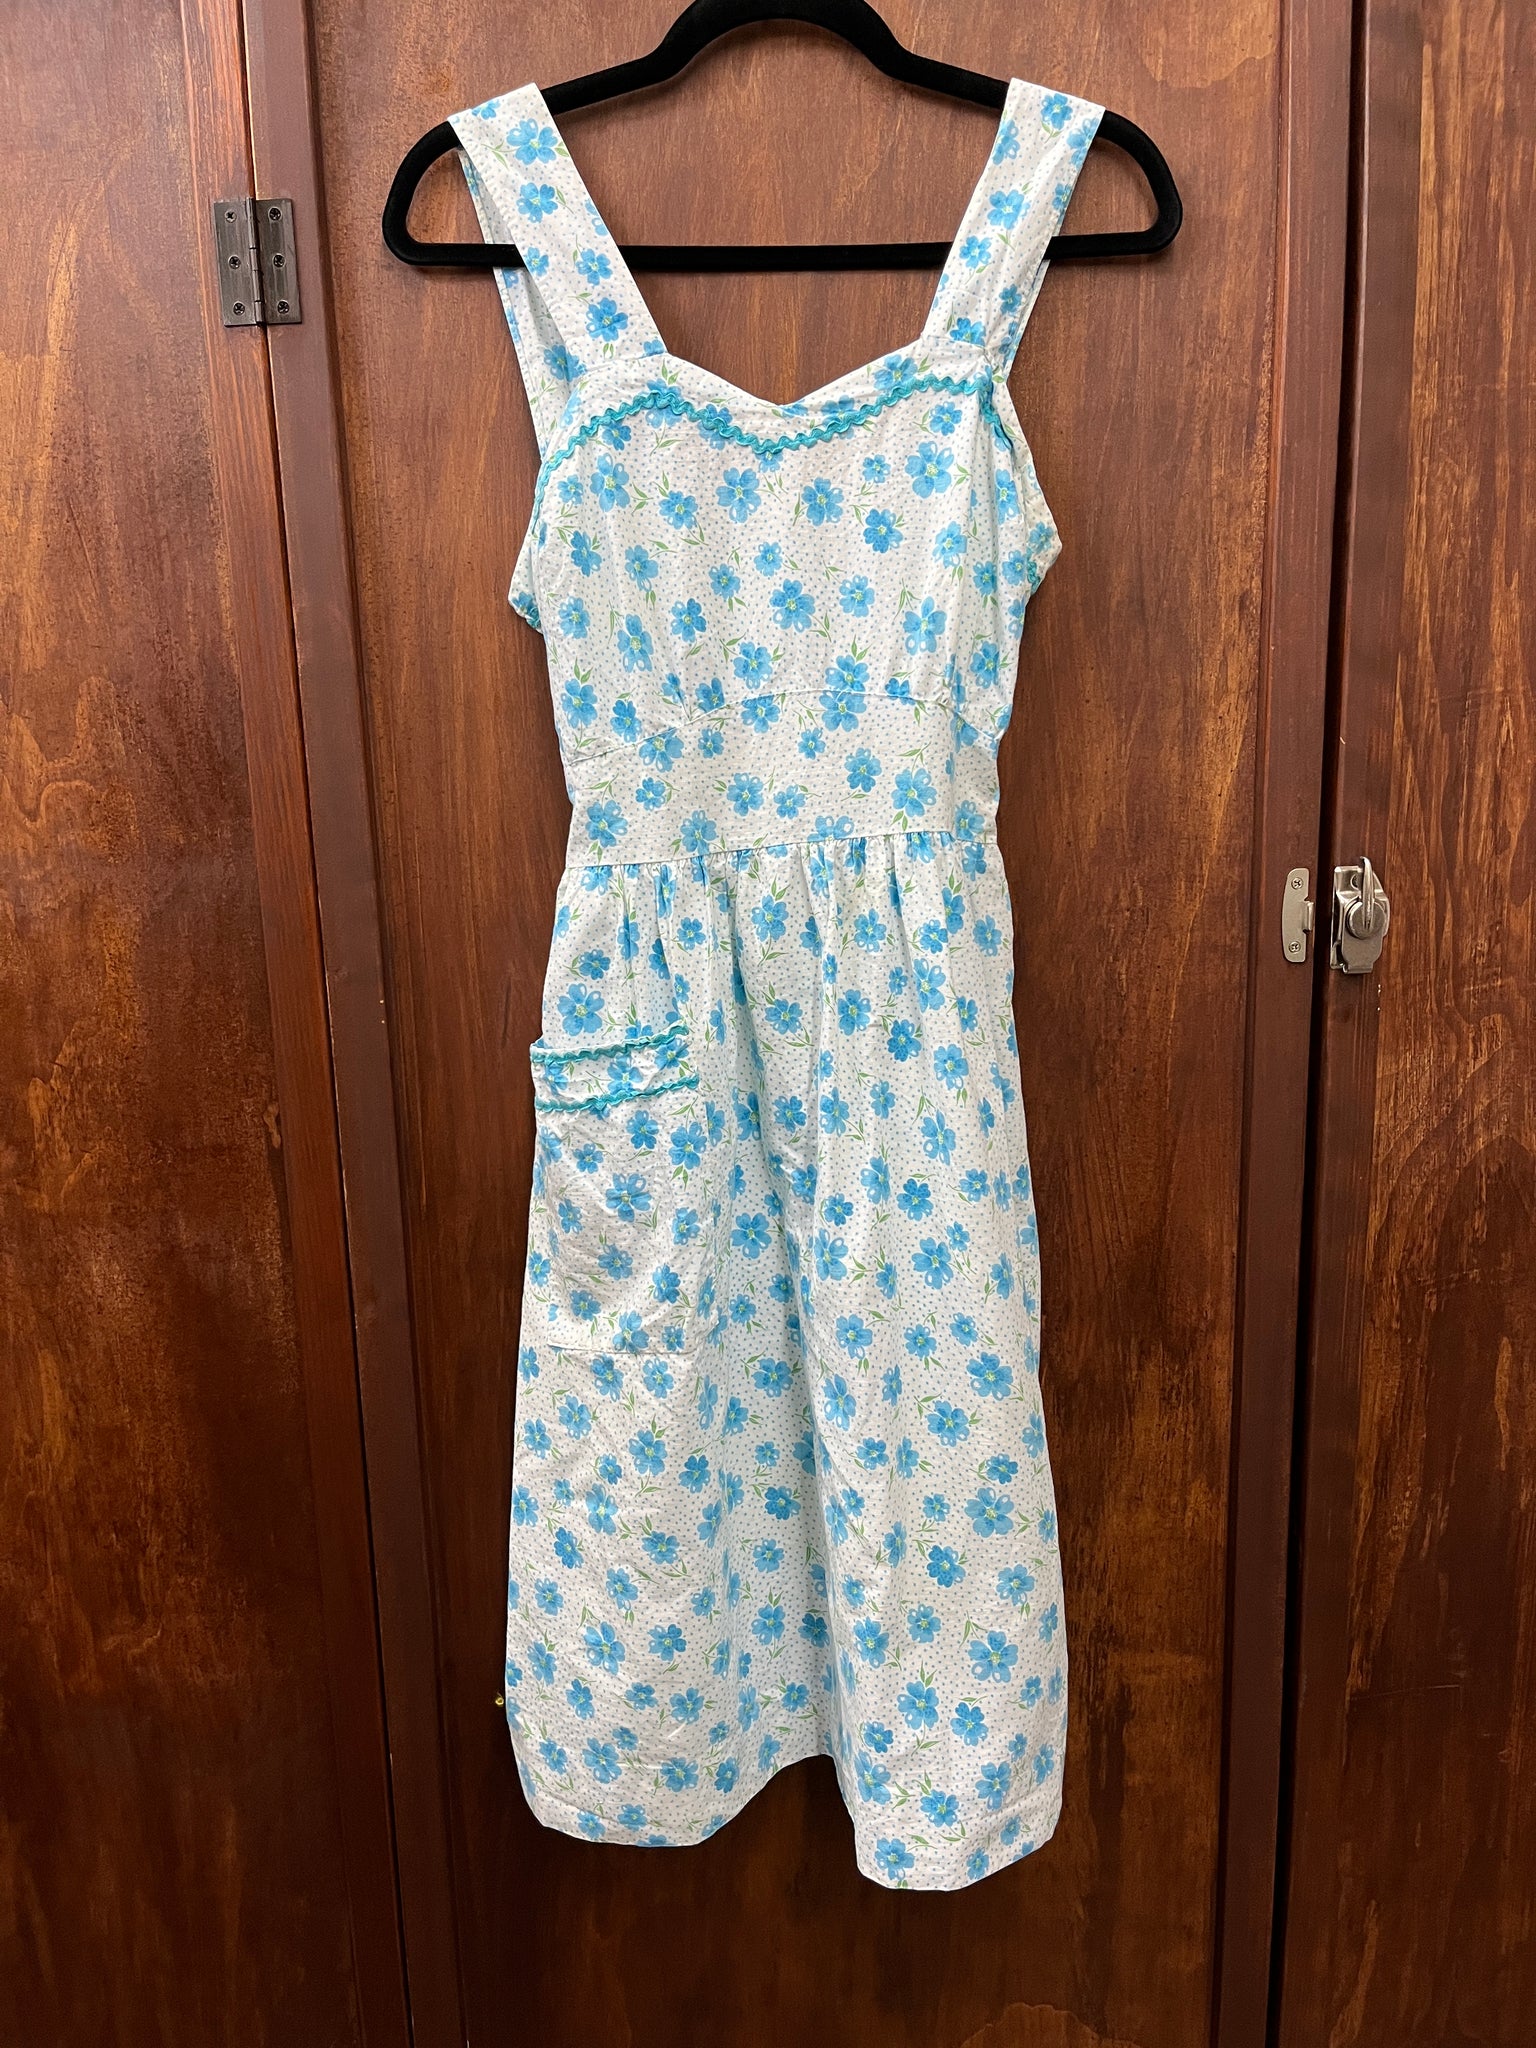 1960s DRESS- blue floral little diddy day dress